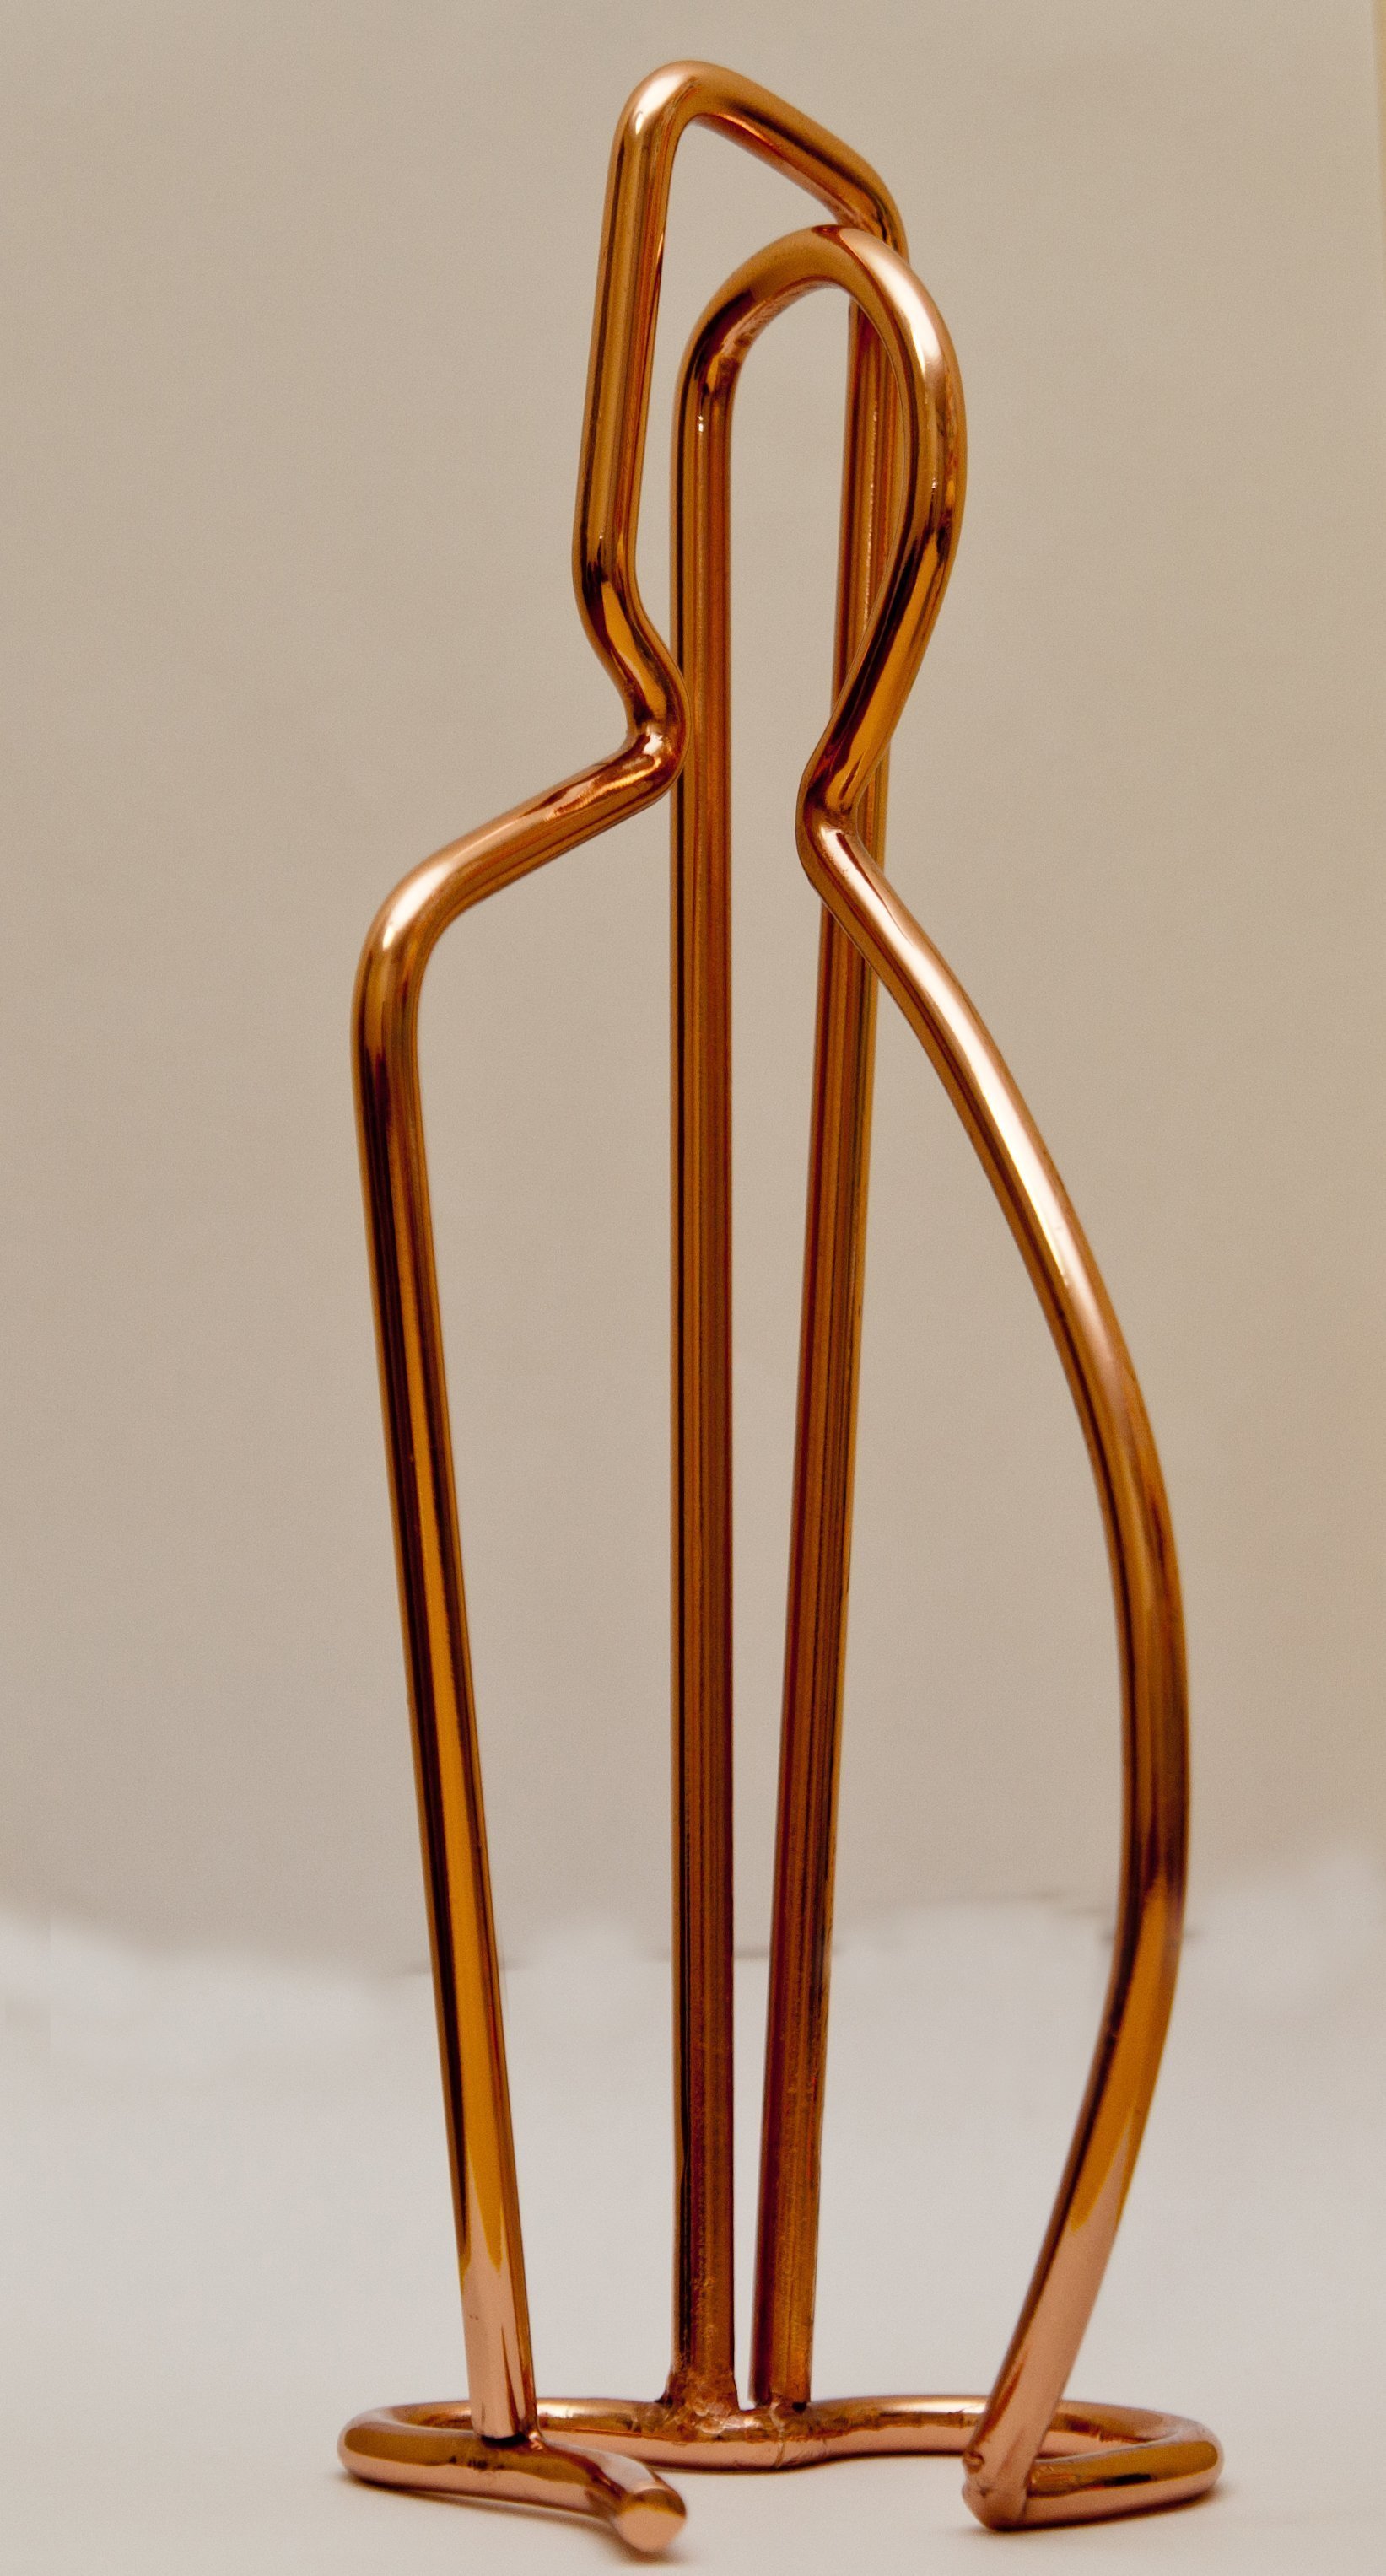 Max Tolentino; Happy Couple , 2017, Original Sculpture Other, 12 x 29 cm. Artwork description: 241 sculpture in steel coated with copper , created in 2017 to honor the law aimed at curbing, preventing and eradicating domestic and family violence against women...